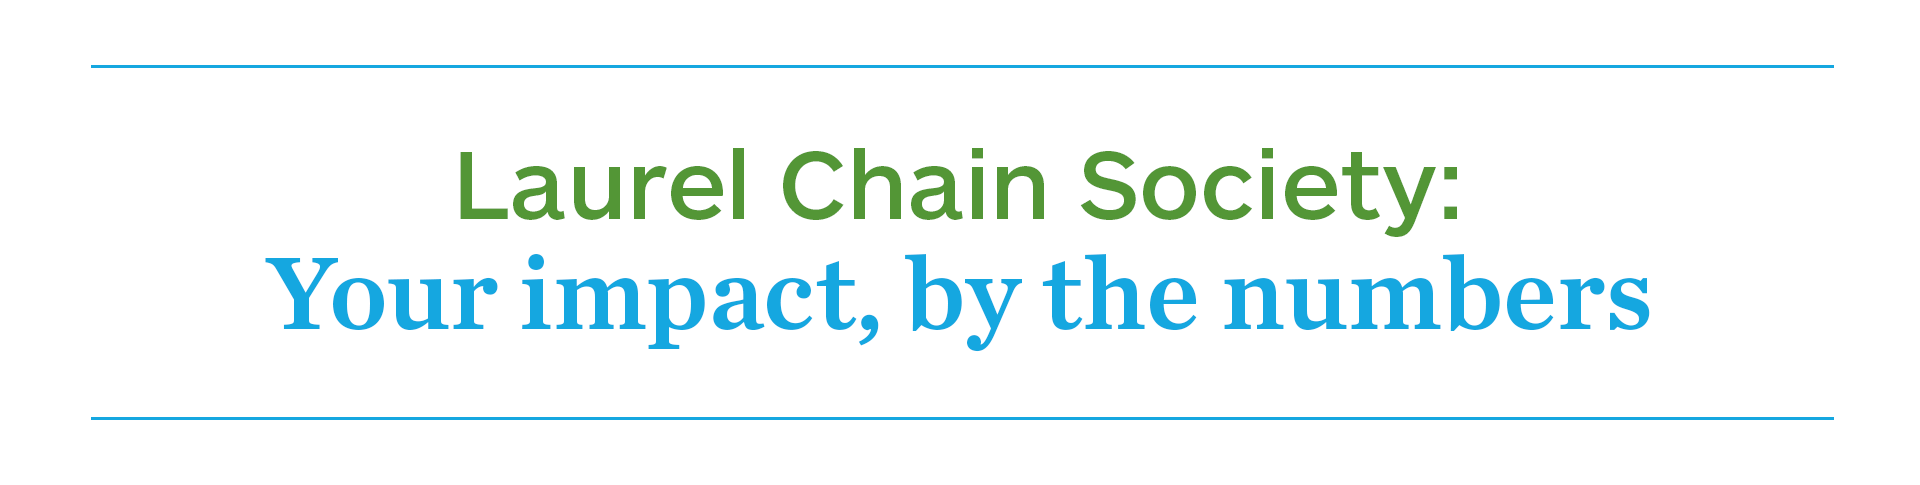 Laurel Chain Society: Your impact, by the numbers